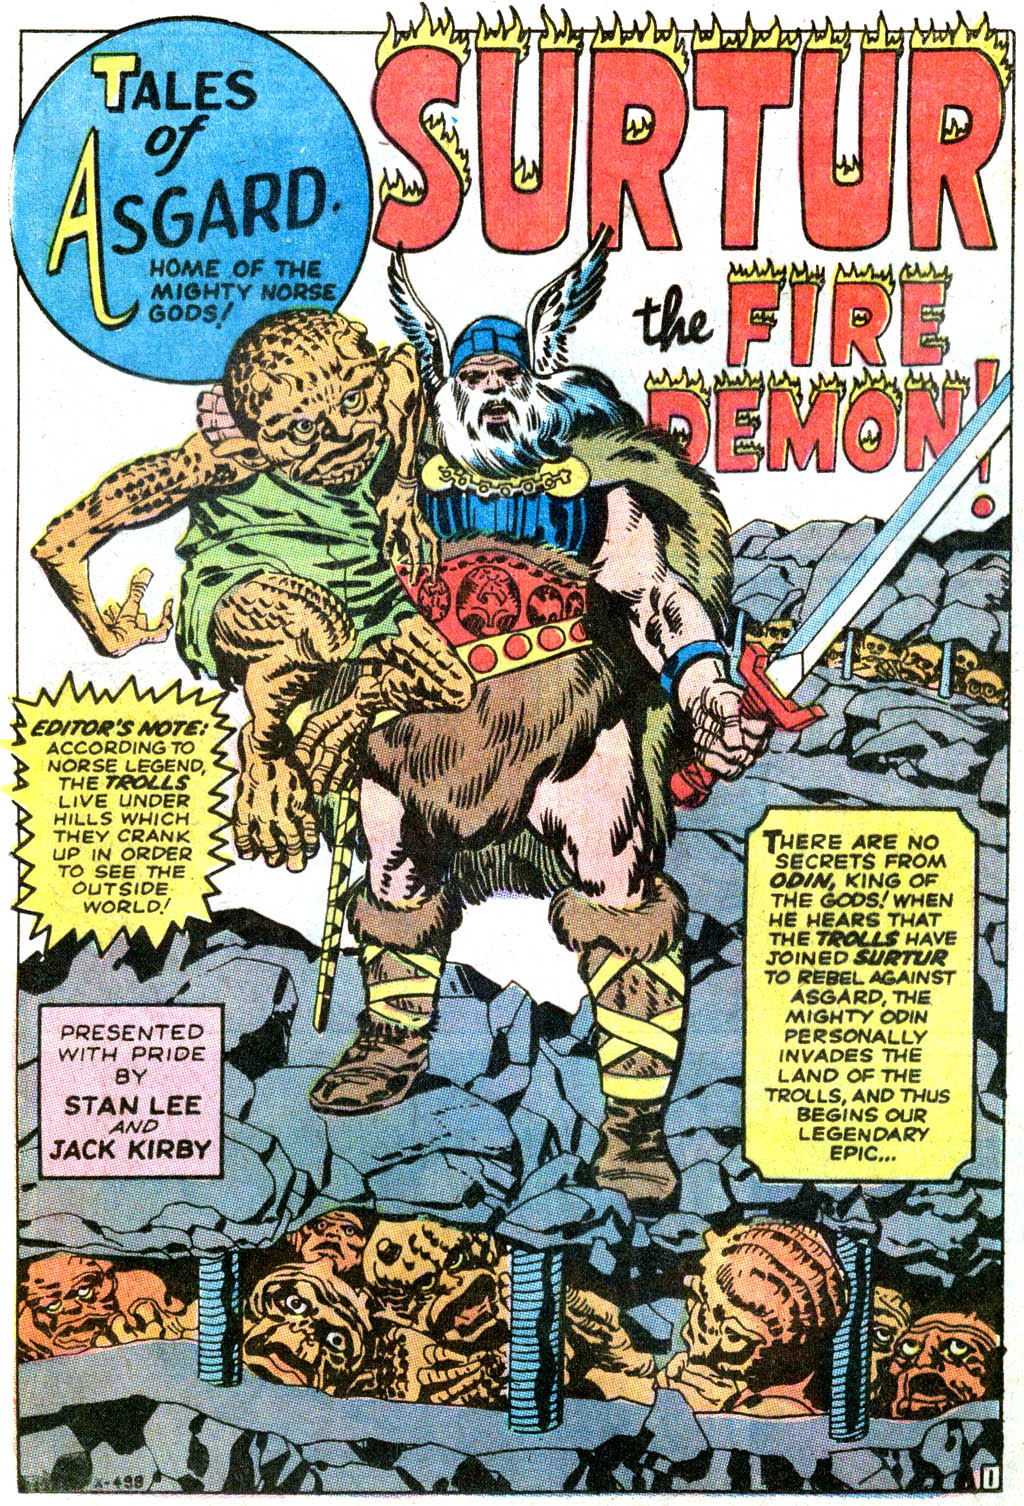 read-online-tales-of-asgard-1968-comic-issue-full